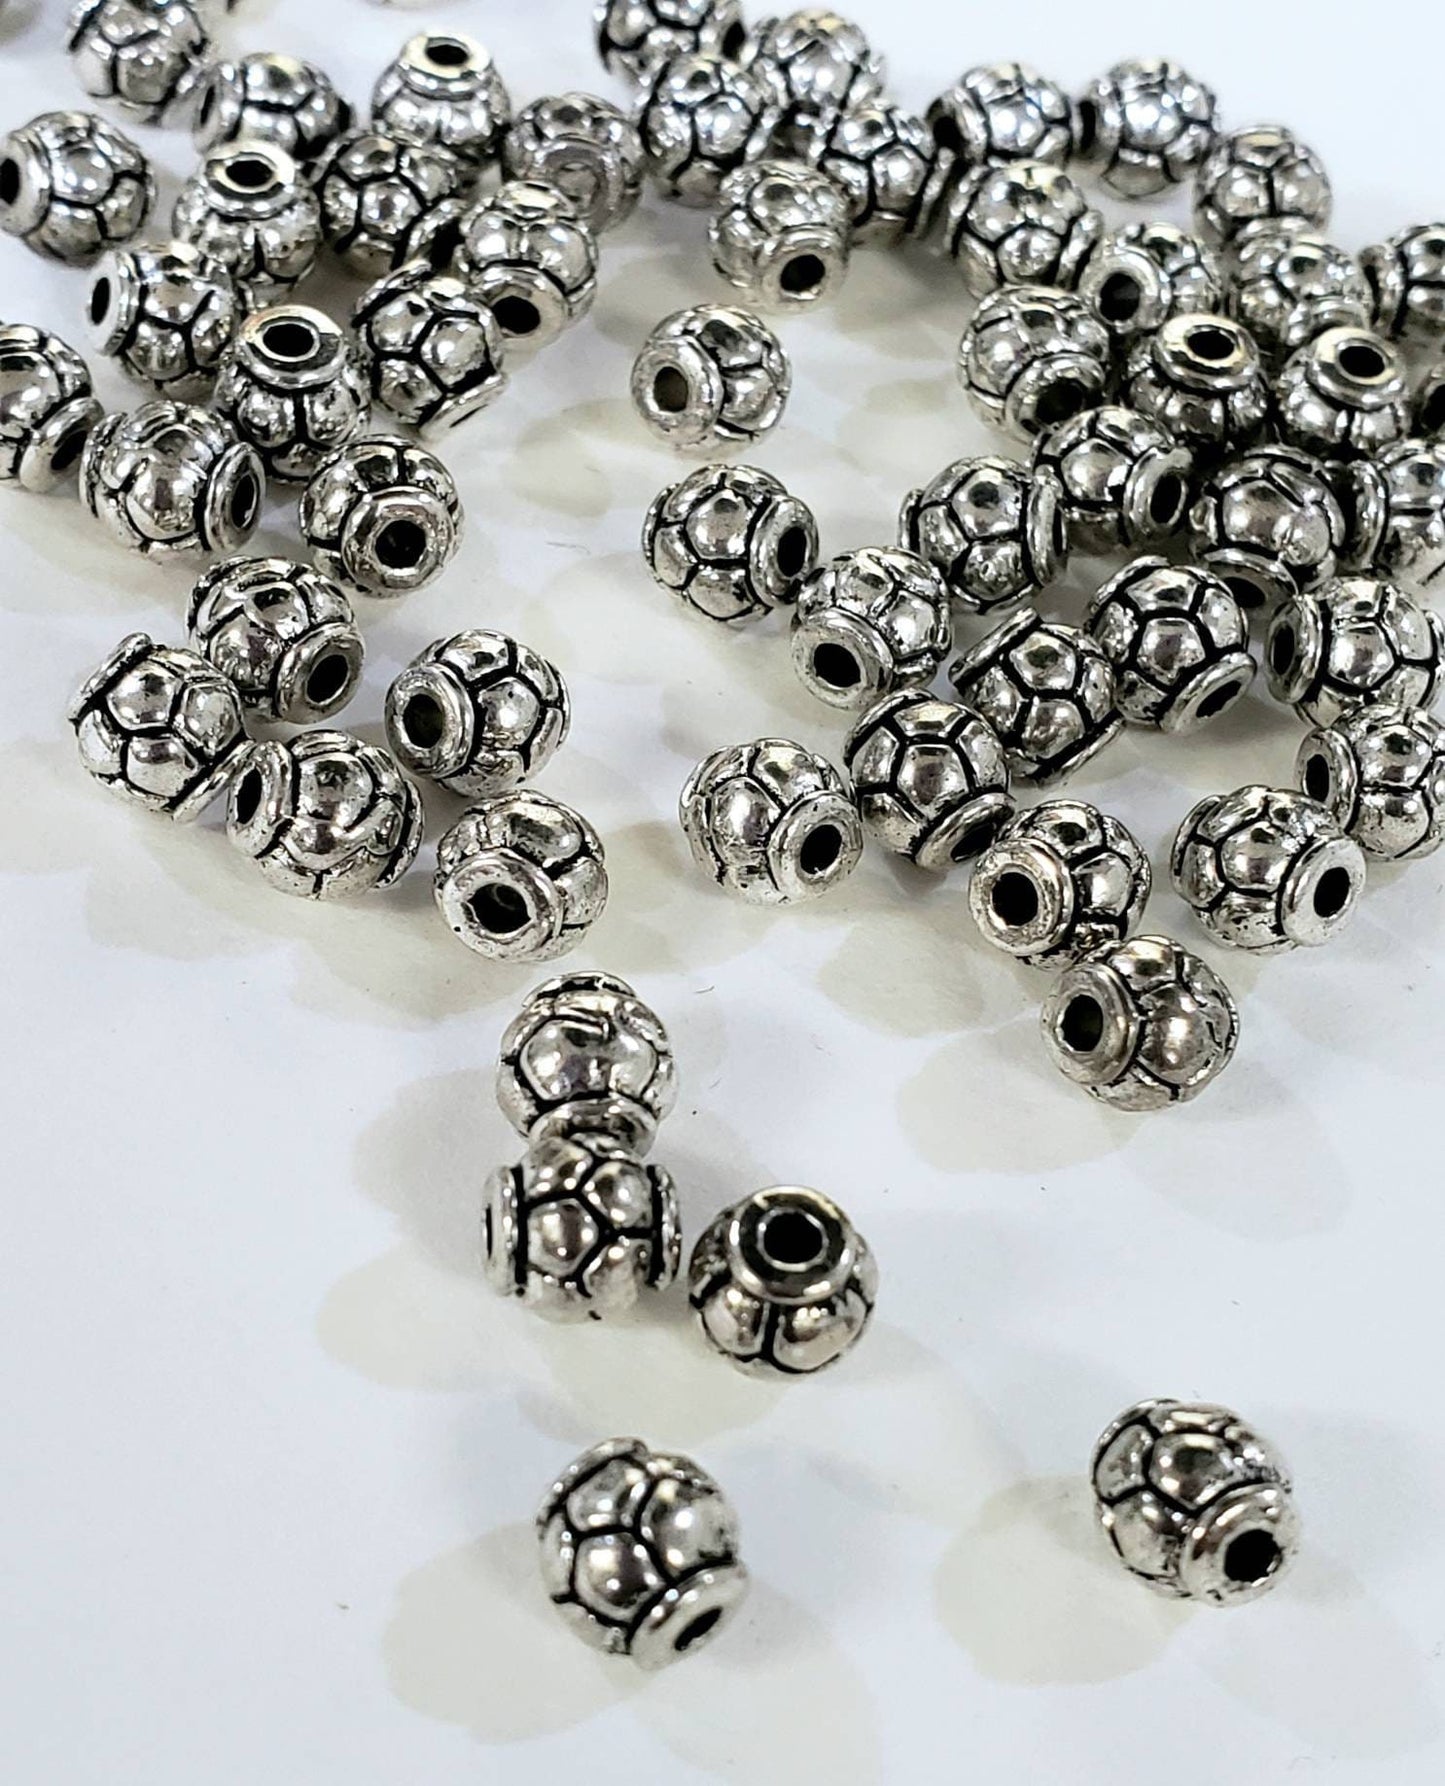 925 Sterling Silver bali 5mm spacer bead, heavy weight vintage handmade bali bead for jewelry making. Sell by 6 pcs set .